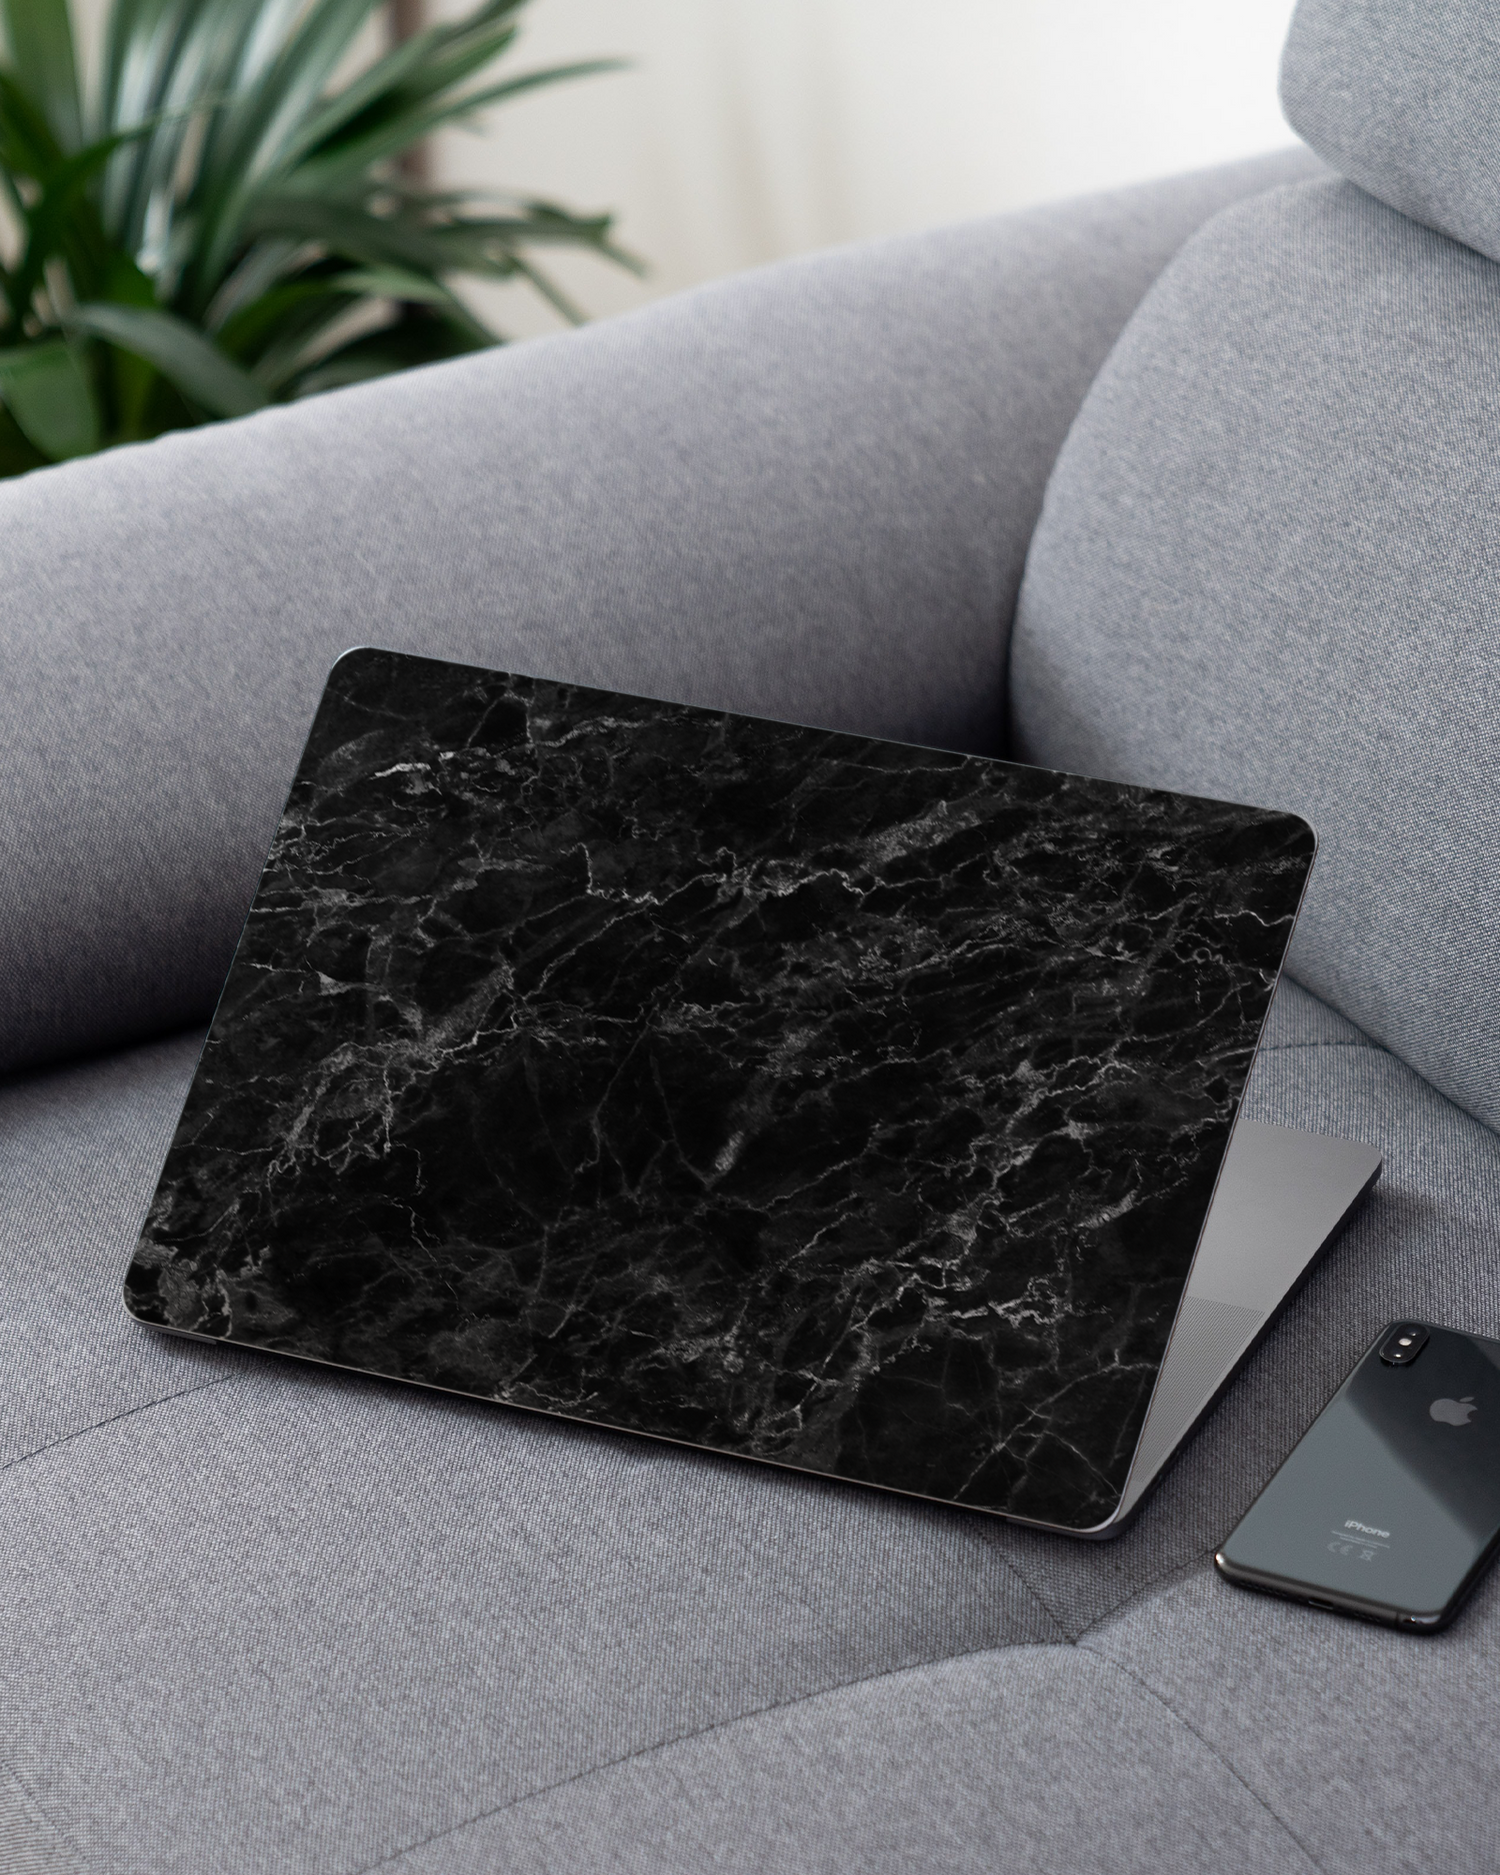 Midnight Marble Laptop Skin for 13 inch Apple MacBooks on a couch